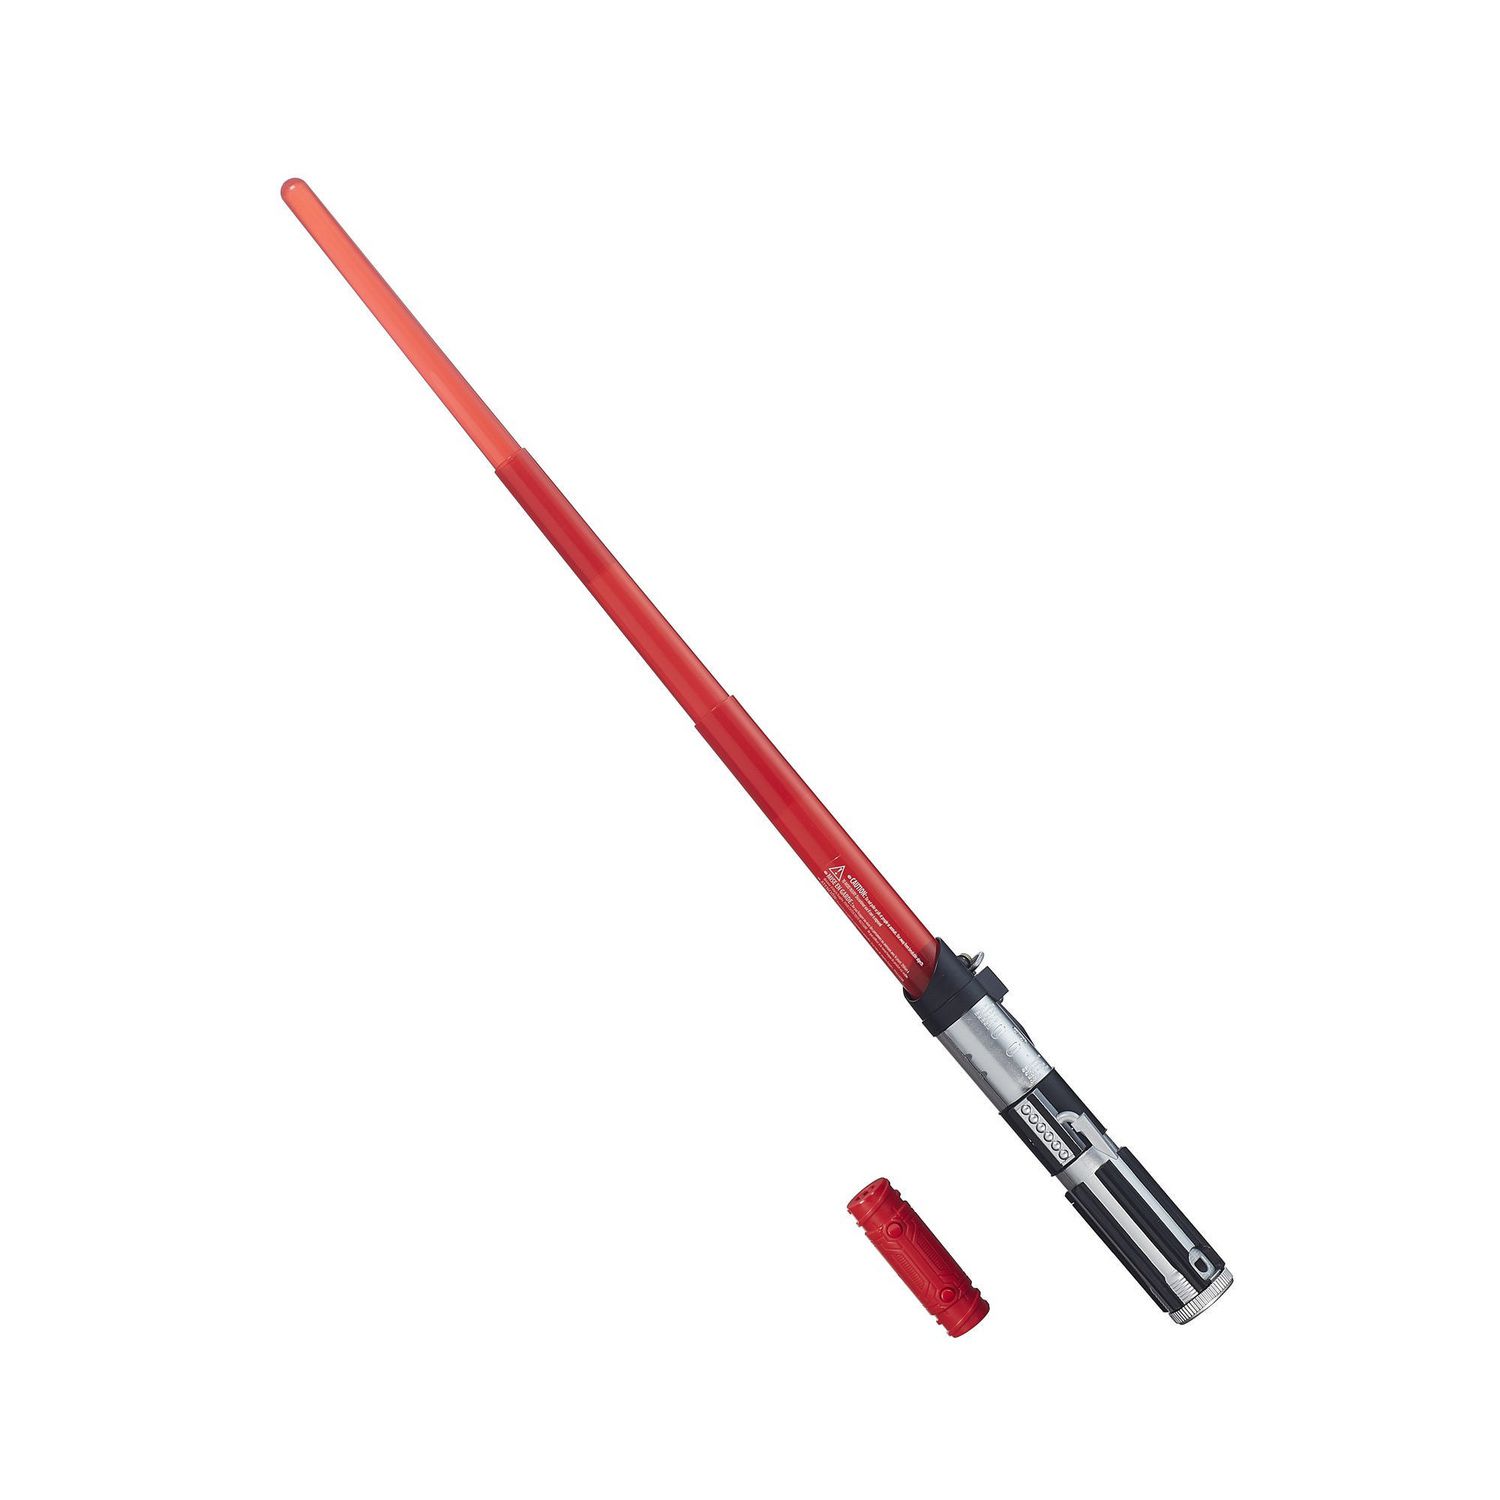 new lightsaber toy